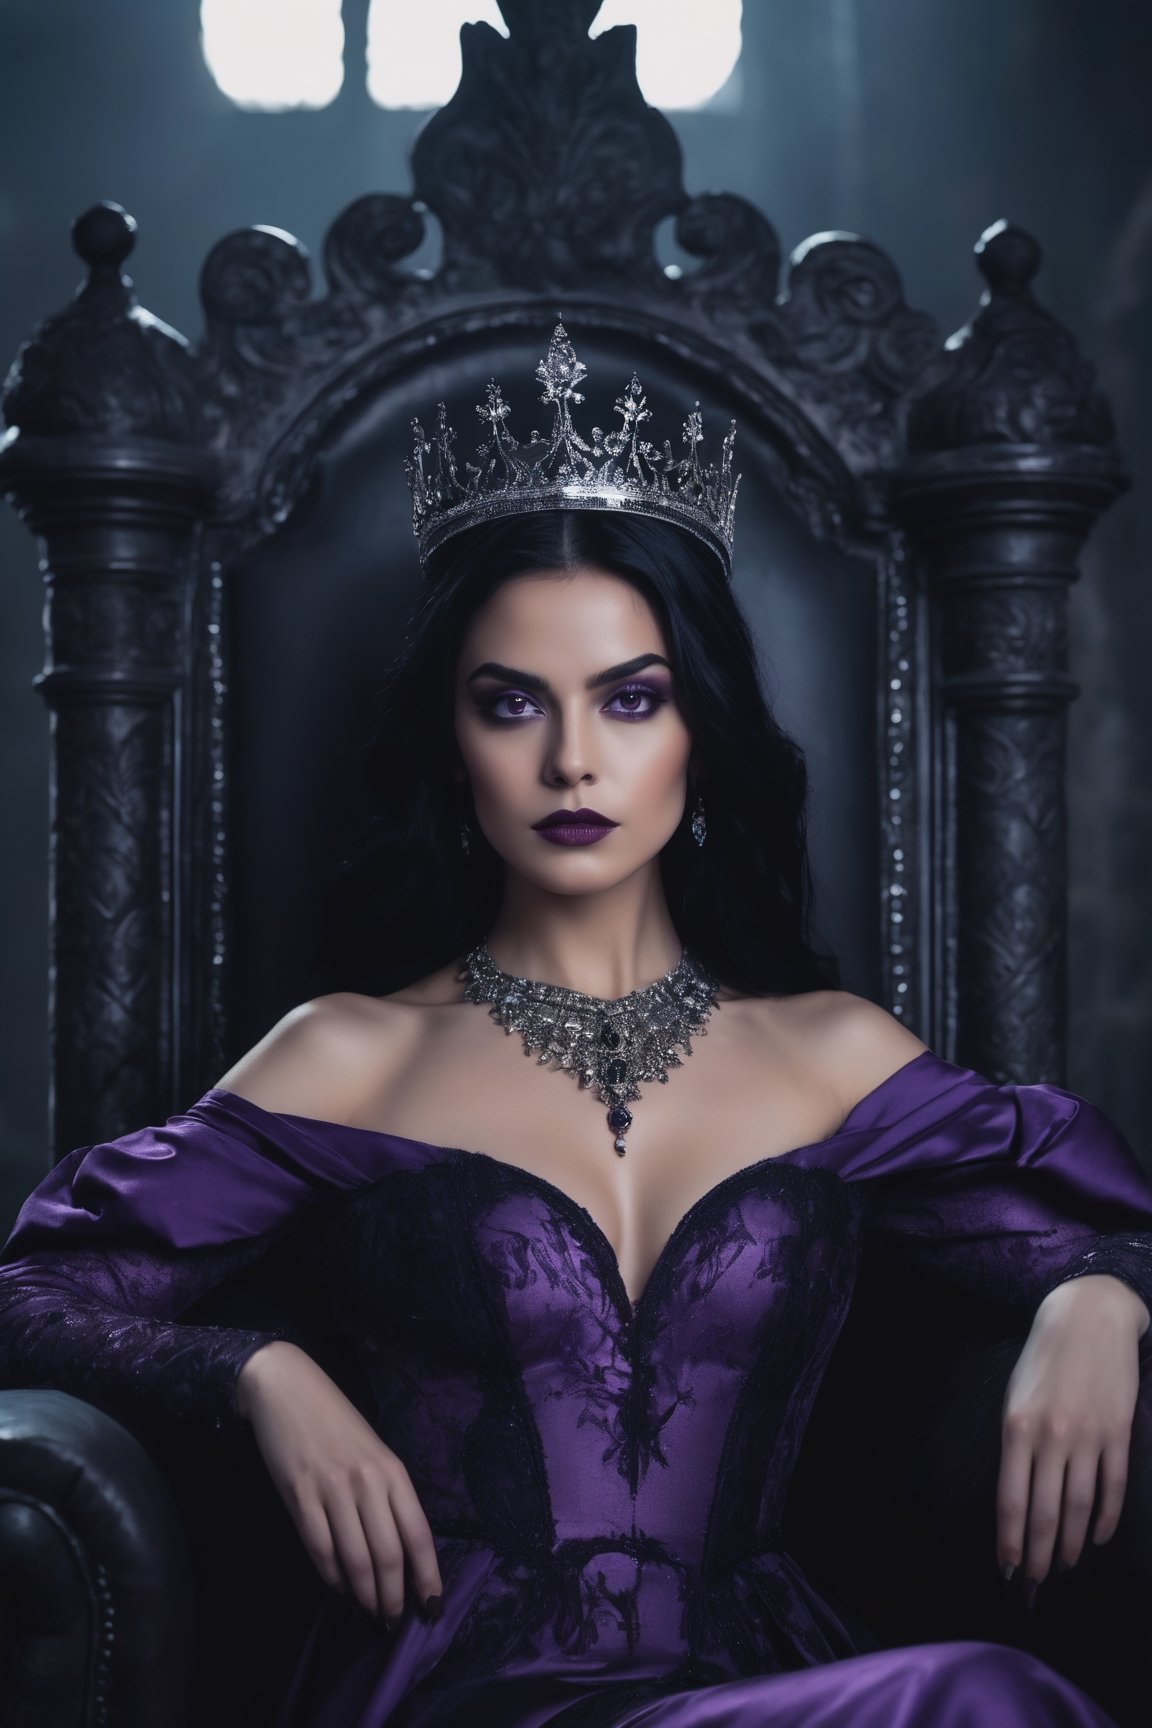 raw realistic cinematic potrait  beautiful woman with black hair, black eyes, wearing purple gown , evil queen, sitting on big black throne in style, dark world queen, beautiful face,grainy cinematic, godlyphoto r3al, detailmaster2, aesthetic portrait, cinematic colors, earthy, moody